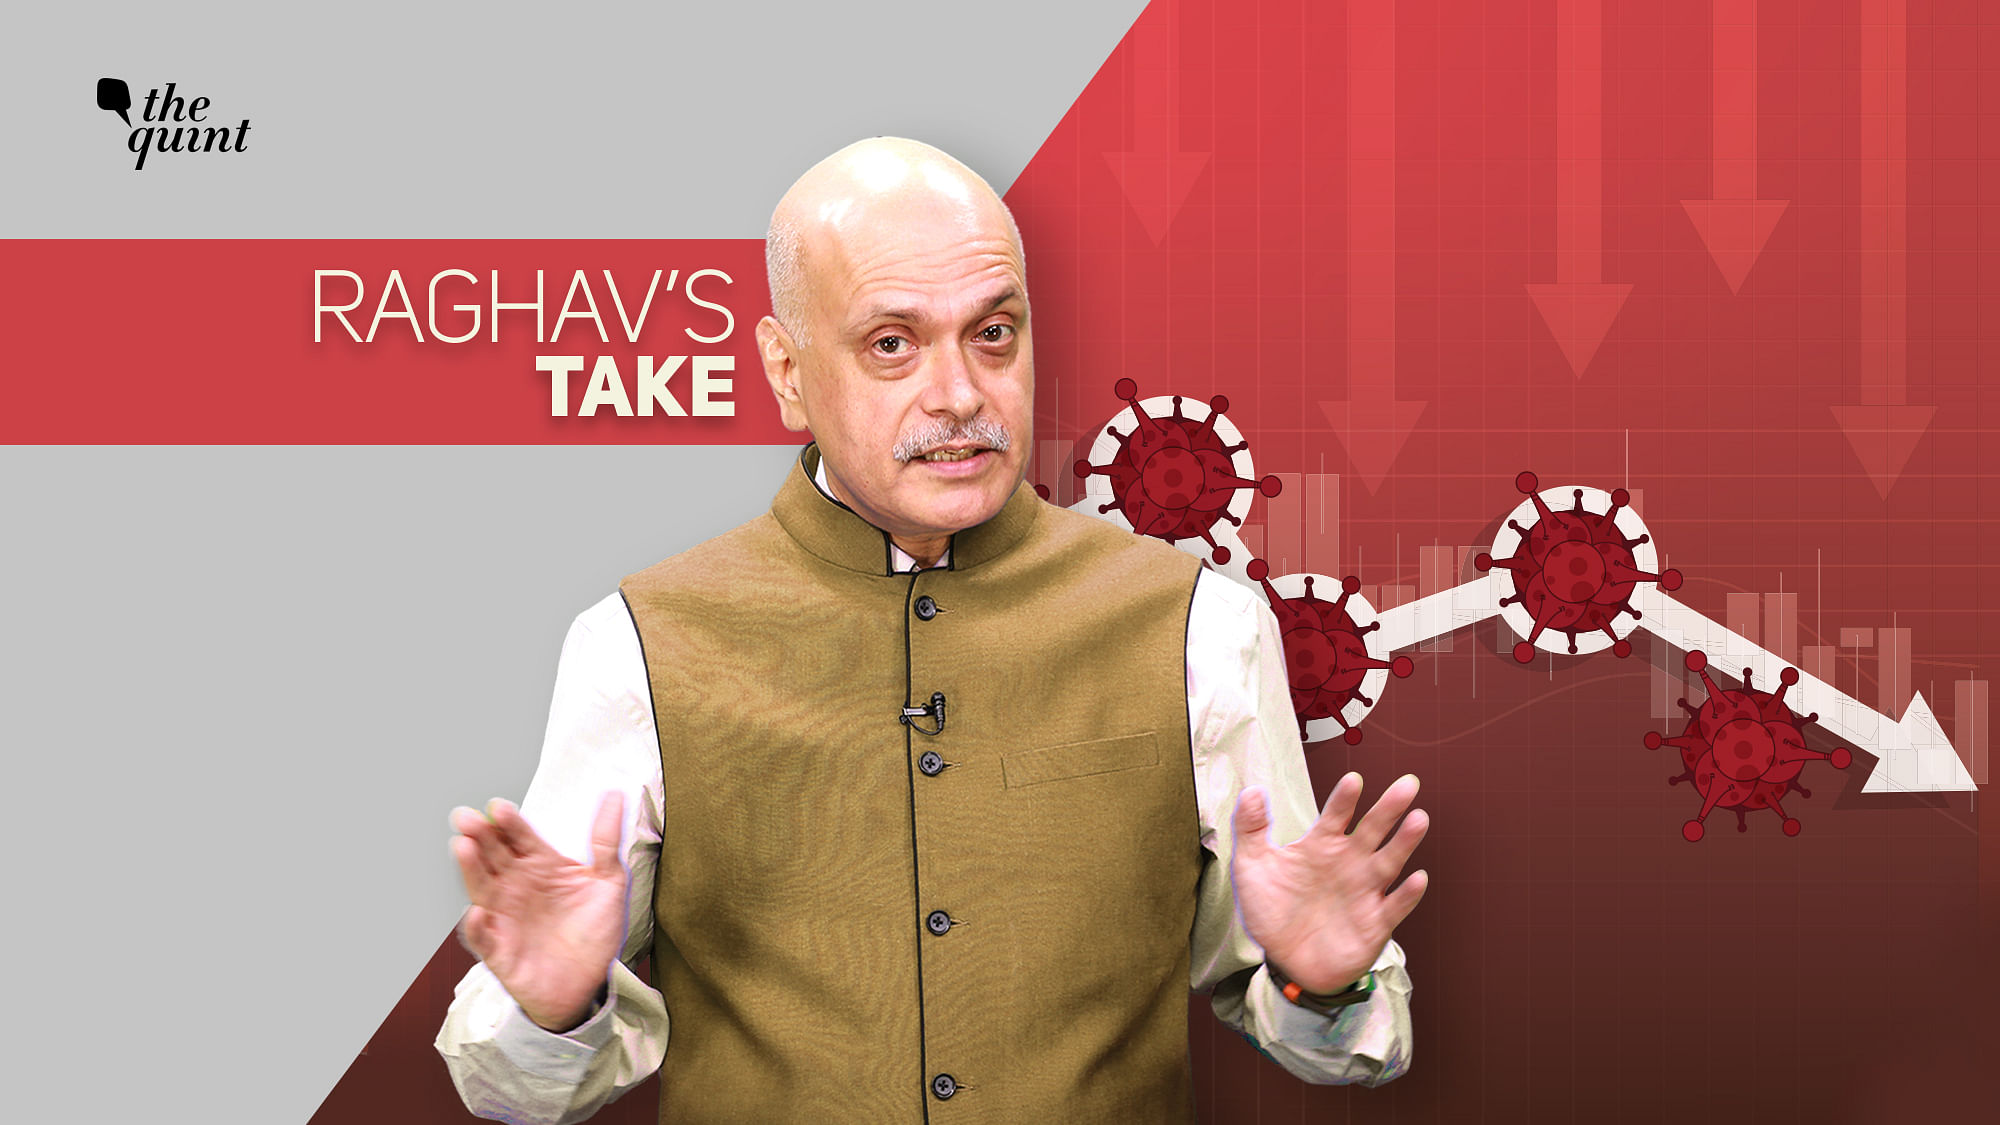 Image of The Quint’s Founder-Editor, Raghav Bahl, used for representational purposes.